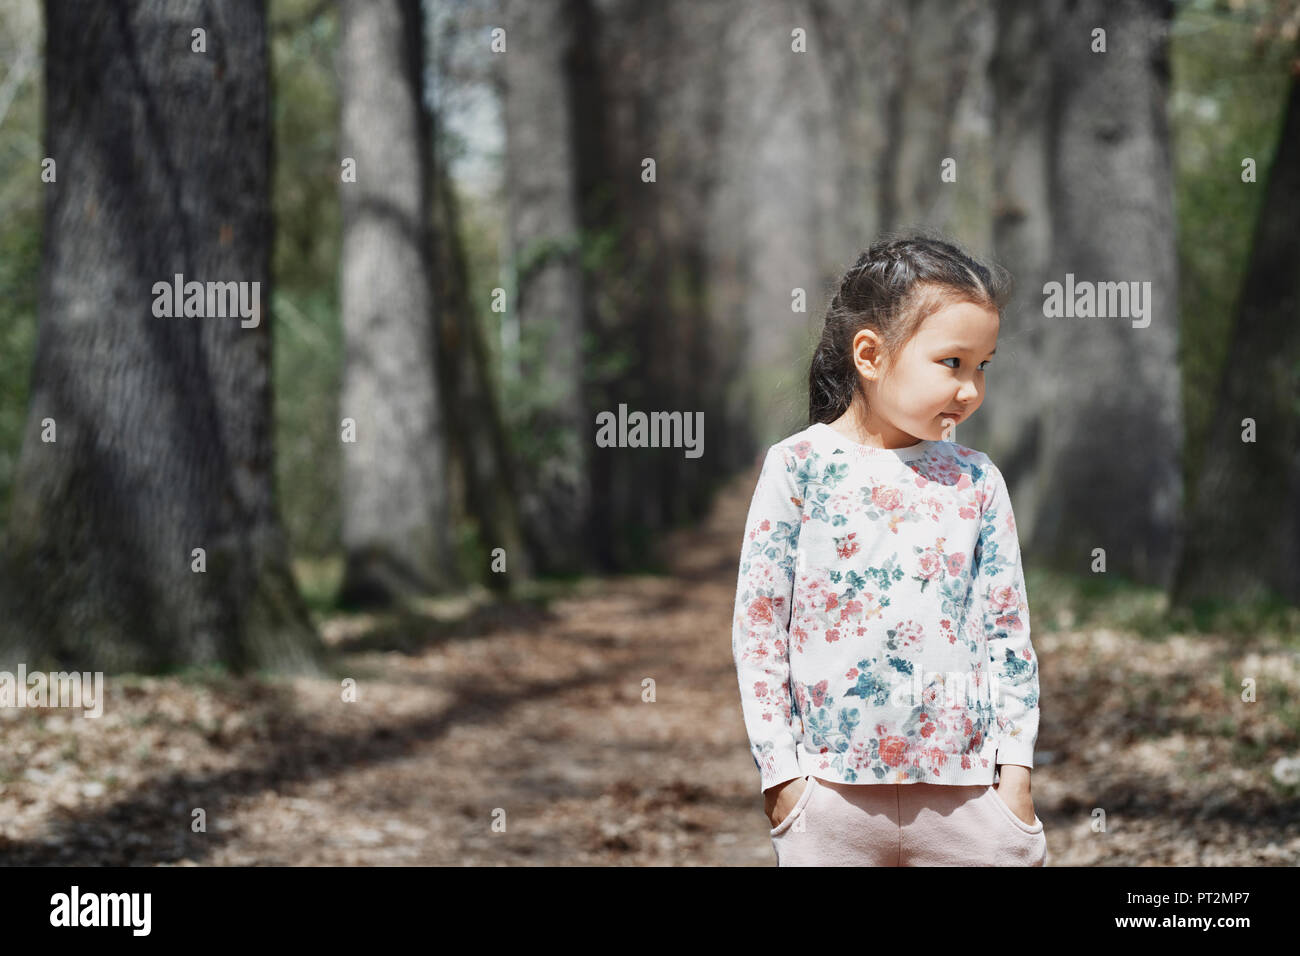 Littele girl standing in park, with hands in pockets Stock Photo